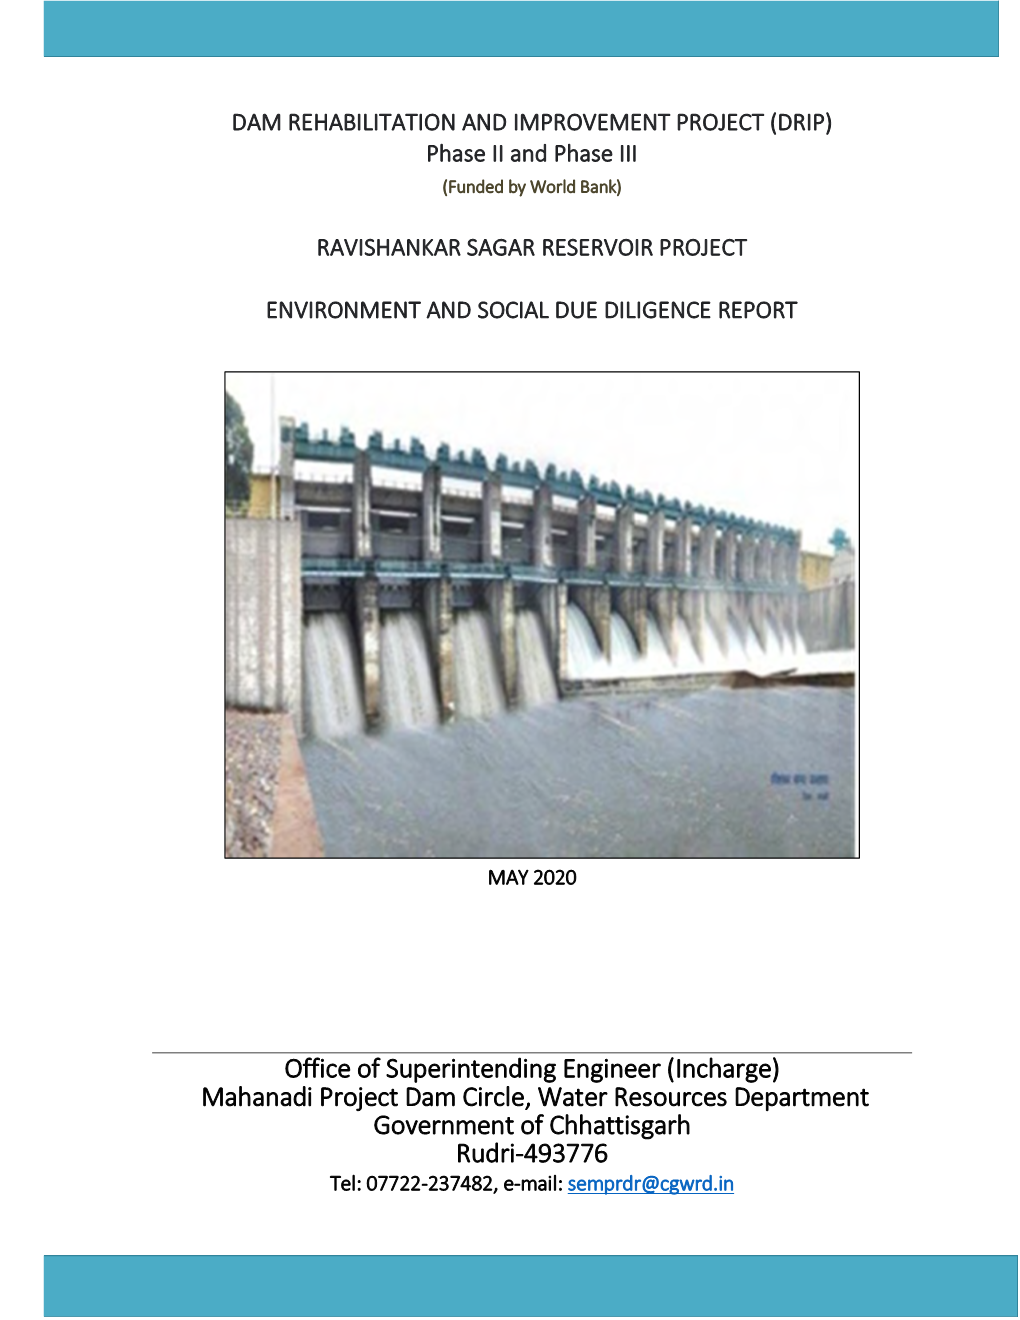 Office of Superintending Engineer (Incharge) Mahanadi Project Dam Circle, Water Resources Department Government of Chhattisgarh